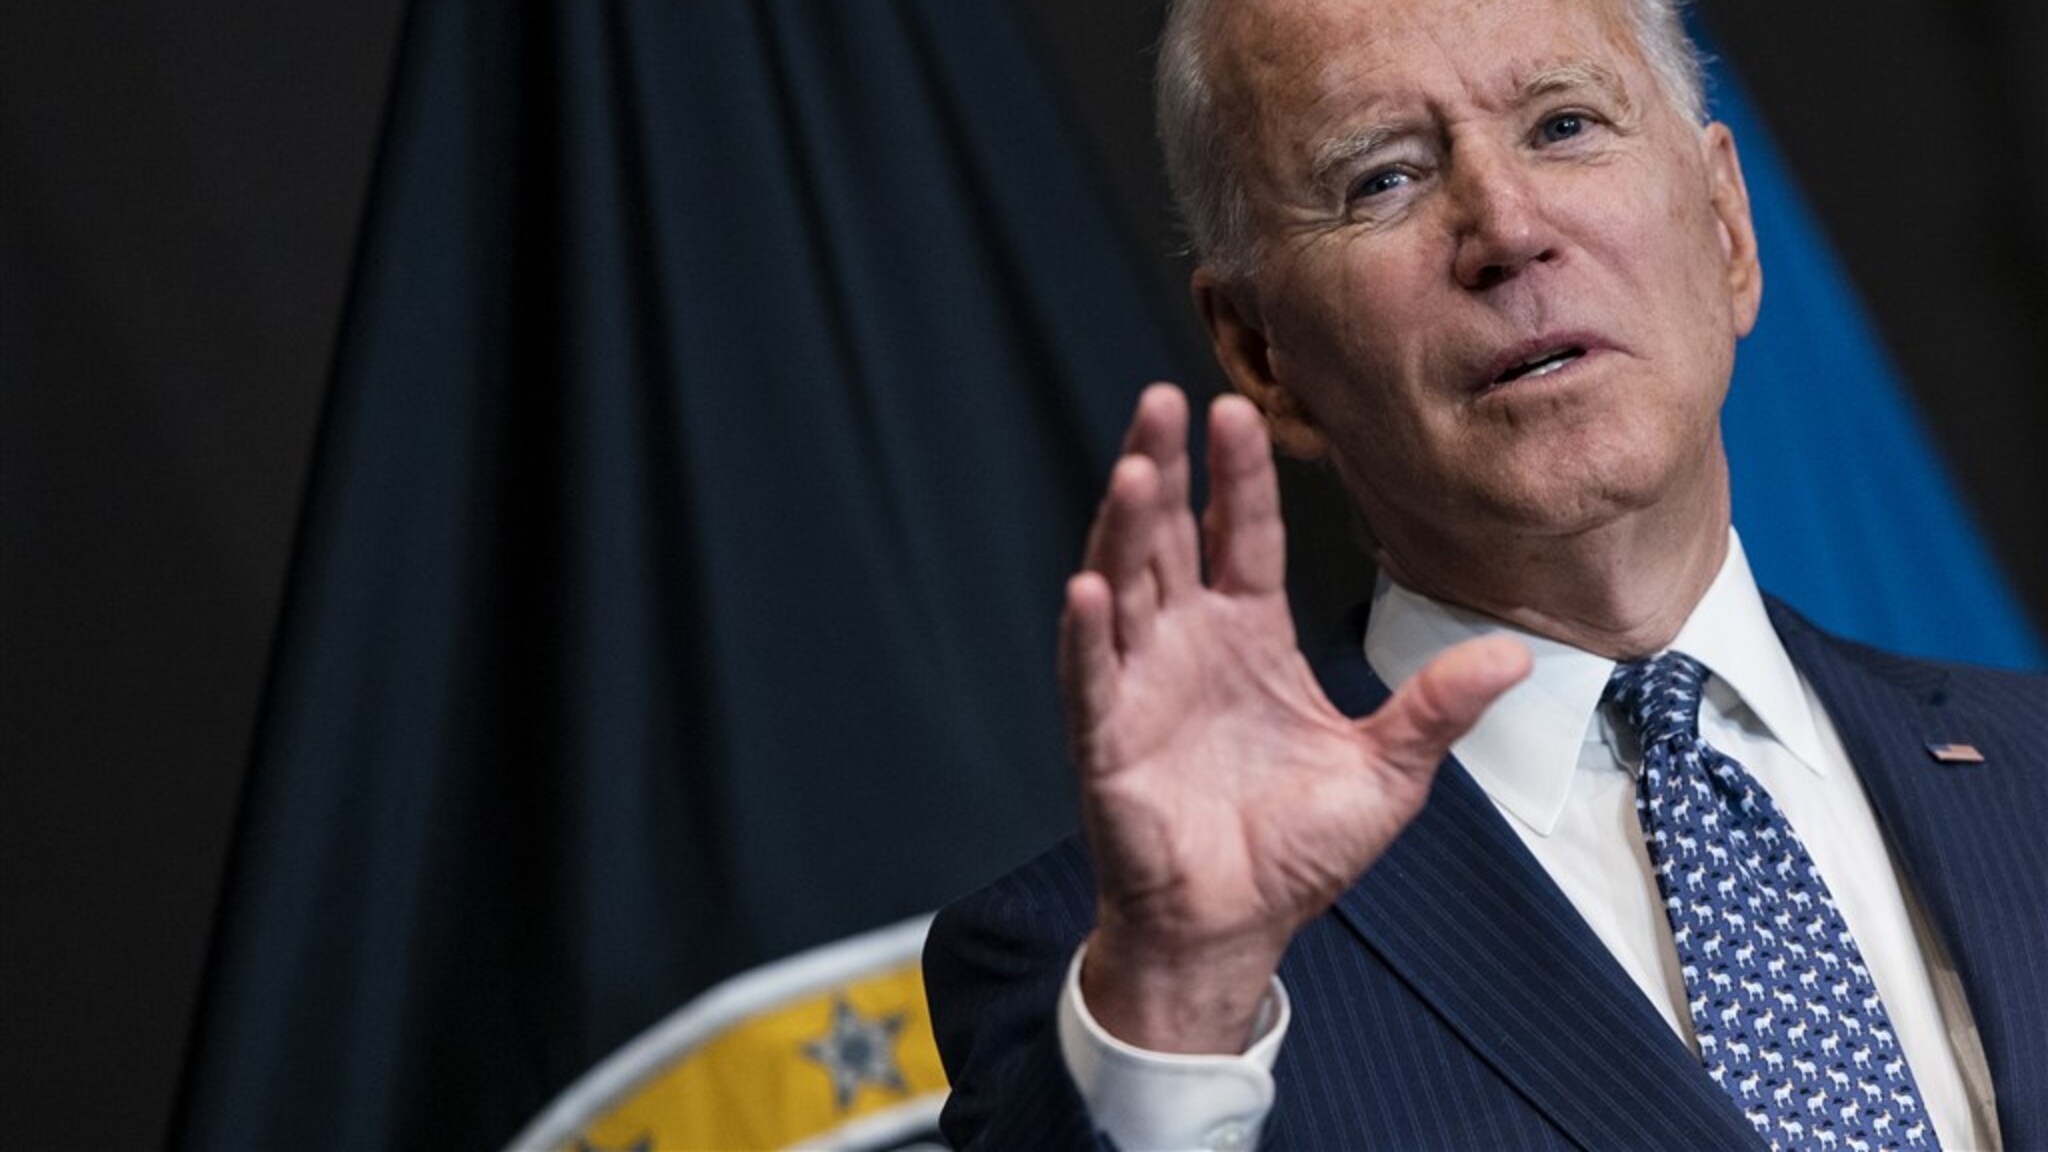 Biden is increasing pressure on the United States not to be vaccinated